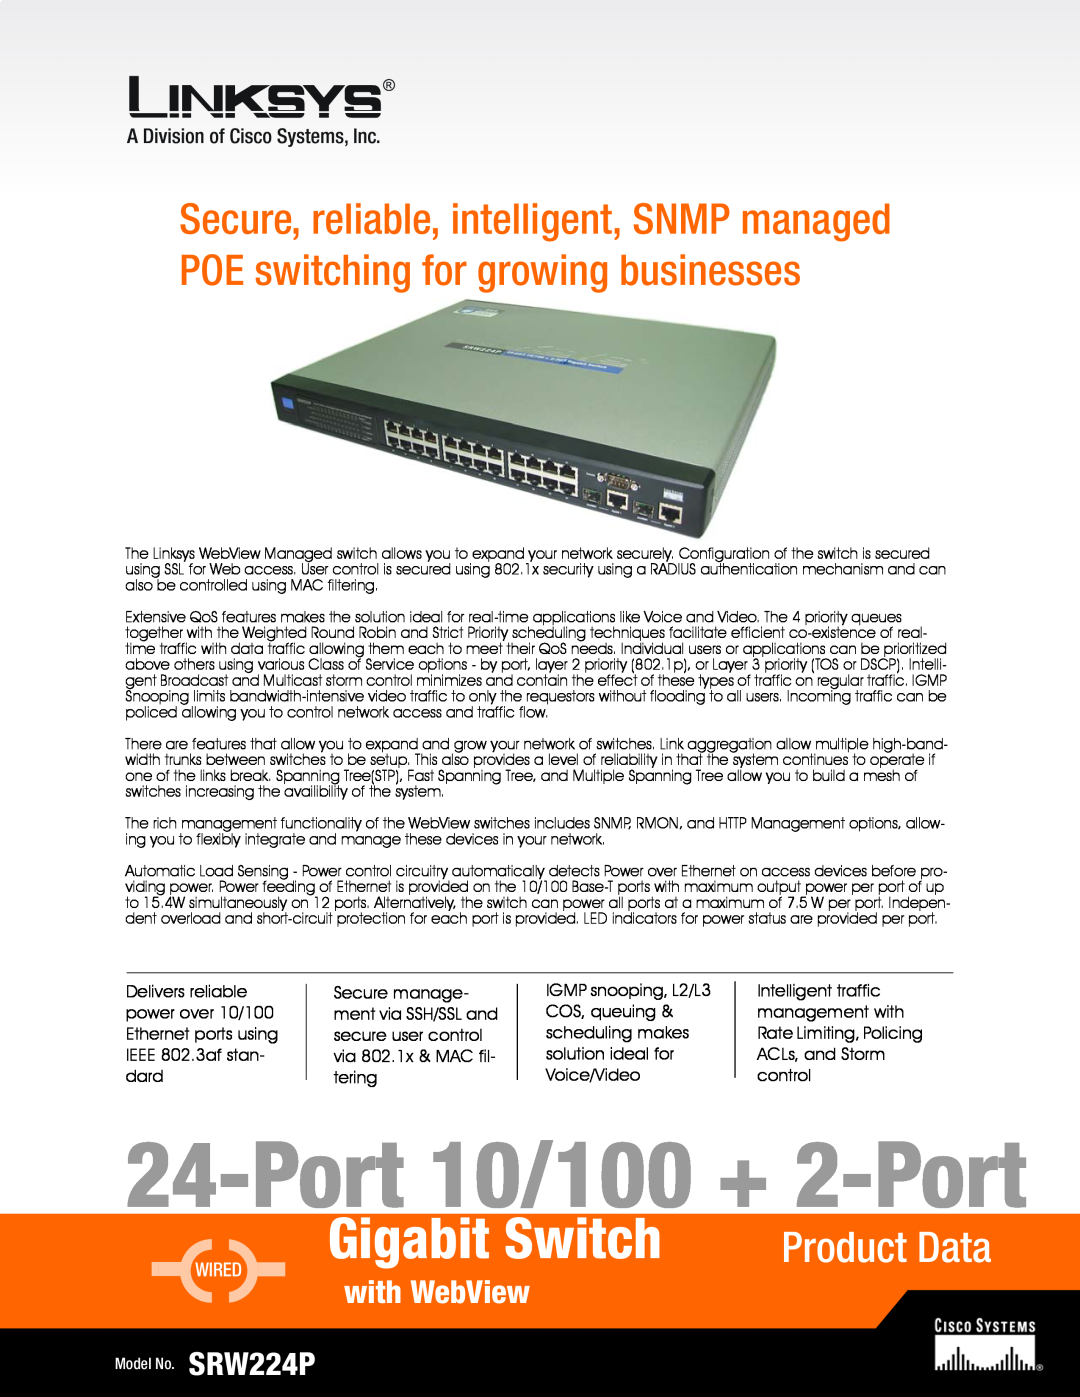 Intel SRW224P manual Port10/100 + 2-Port, Gigabit Switch, Product Data, with WebView 